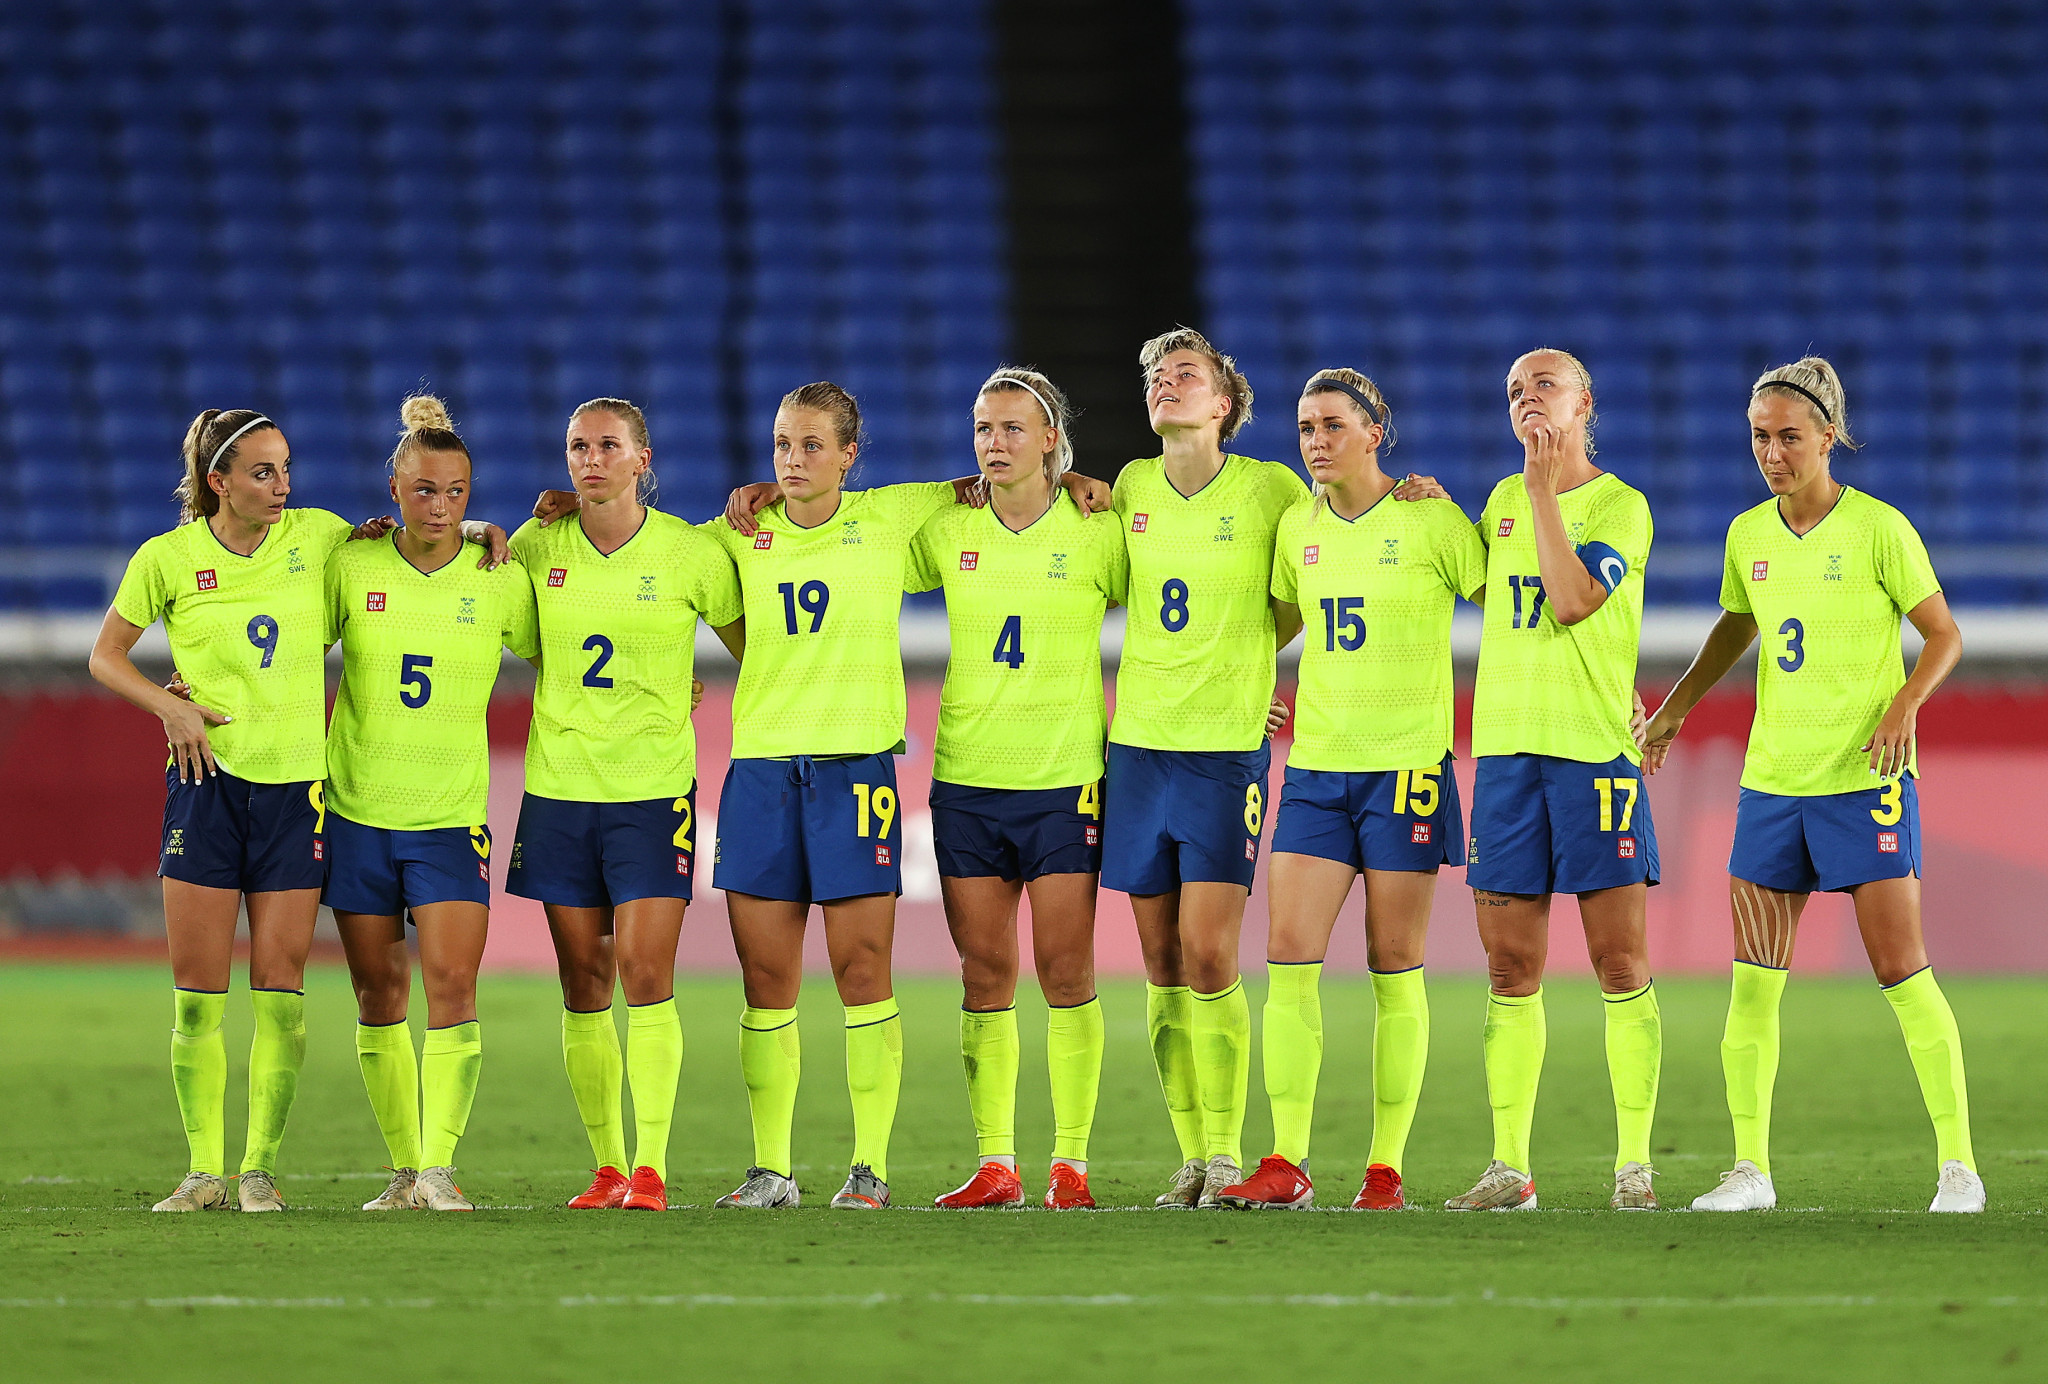 Sweden earned silver in women's football at the Tokyo 2020 Olympics ©Getty Images